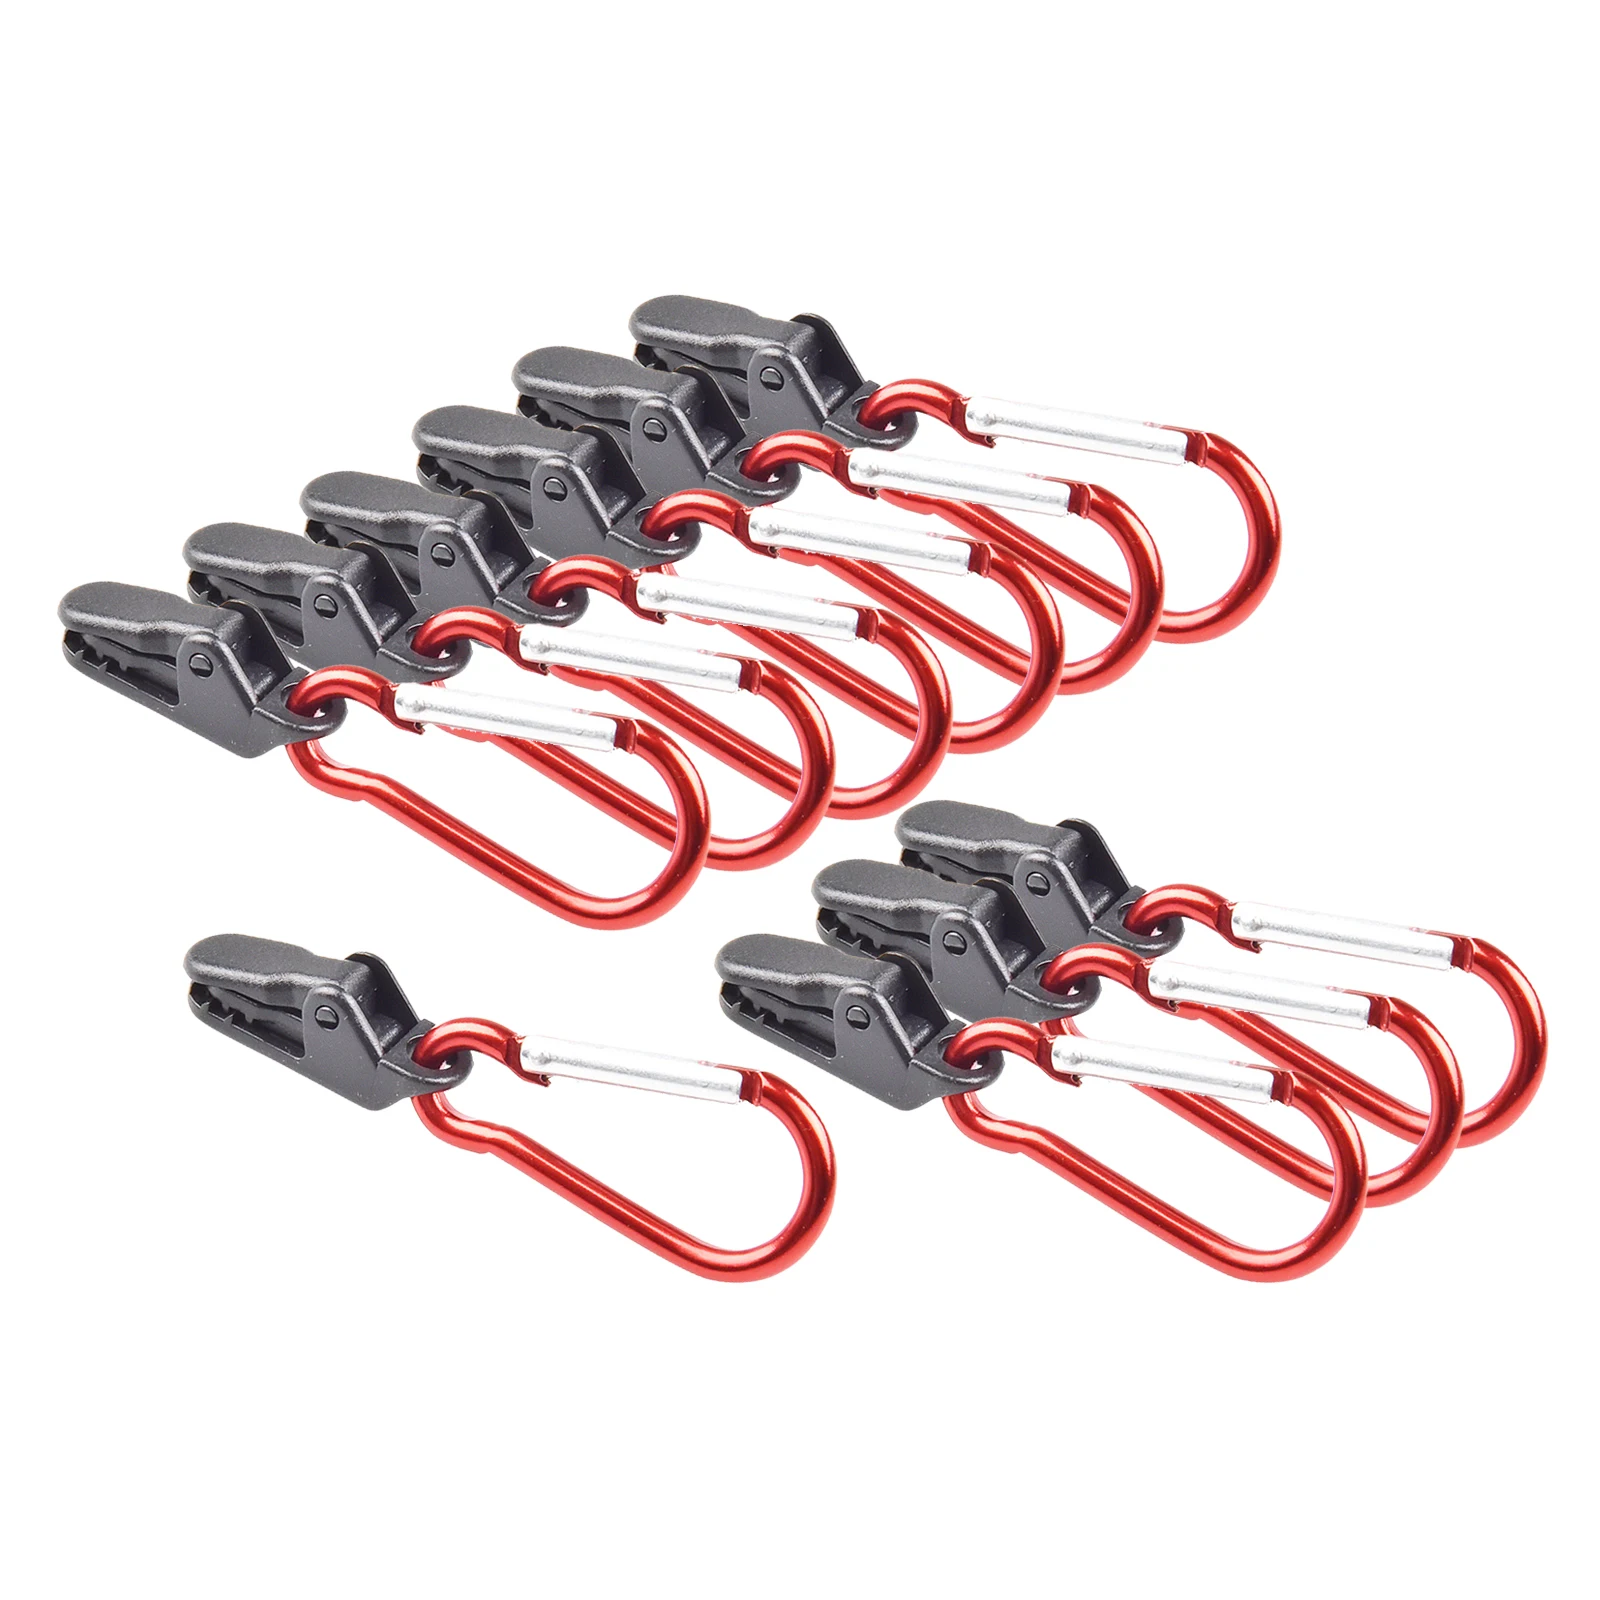 Temporary Porjector Screen 10 Pack Heavy Duty Multi-Purpose Thumb Screw Tarp Clips Clamps Withstand 60mph Strong Wind Fit for Holding Up Tarp Car Cover Pool Cover Canopy Boat Cover 